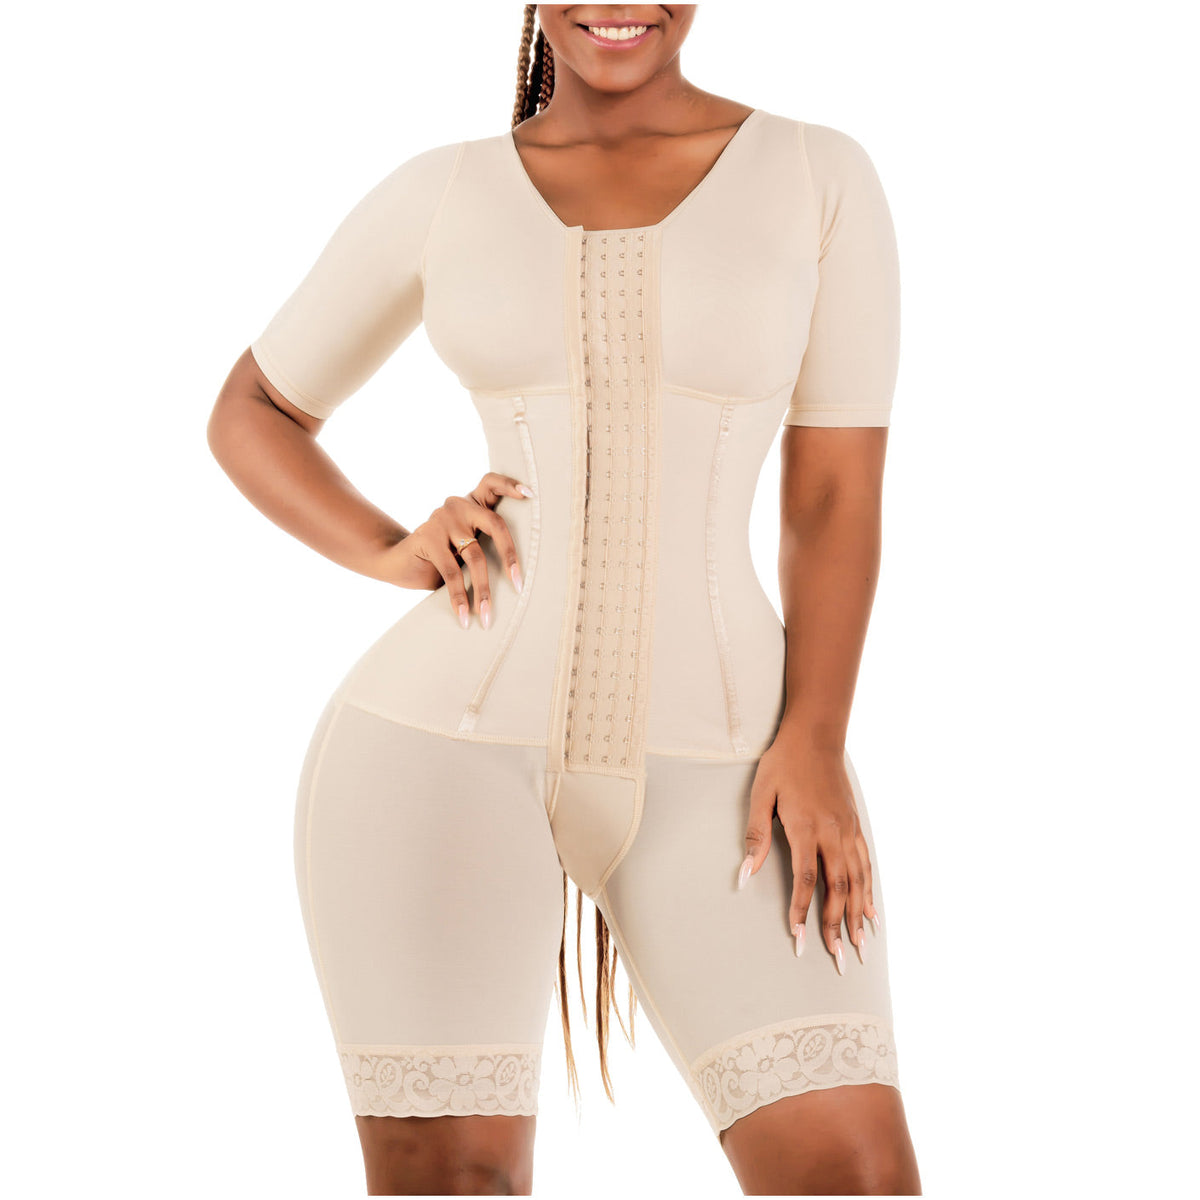 Stretchable Full Body Shaper with Sleeves | 3 in 1 Post Surgery Firm Control Garment | 938BF